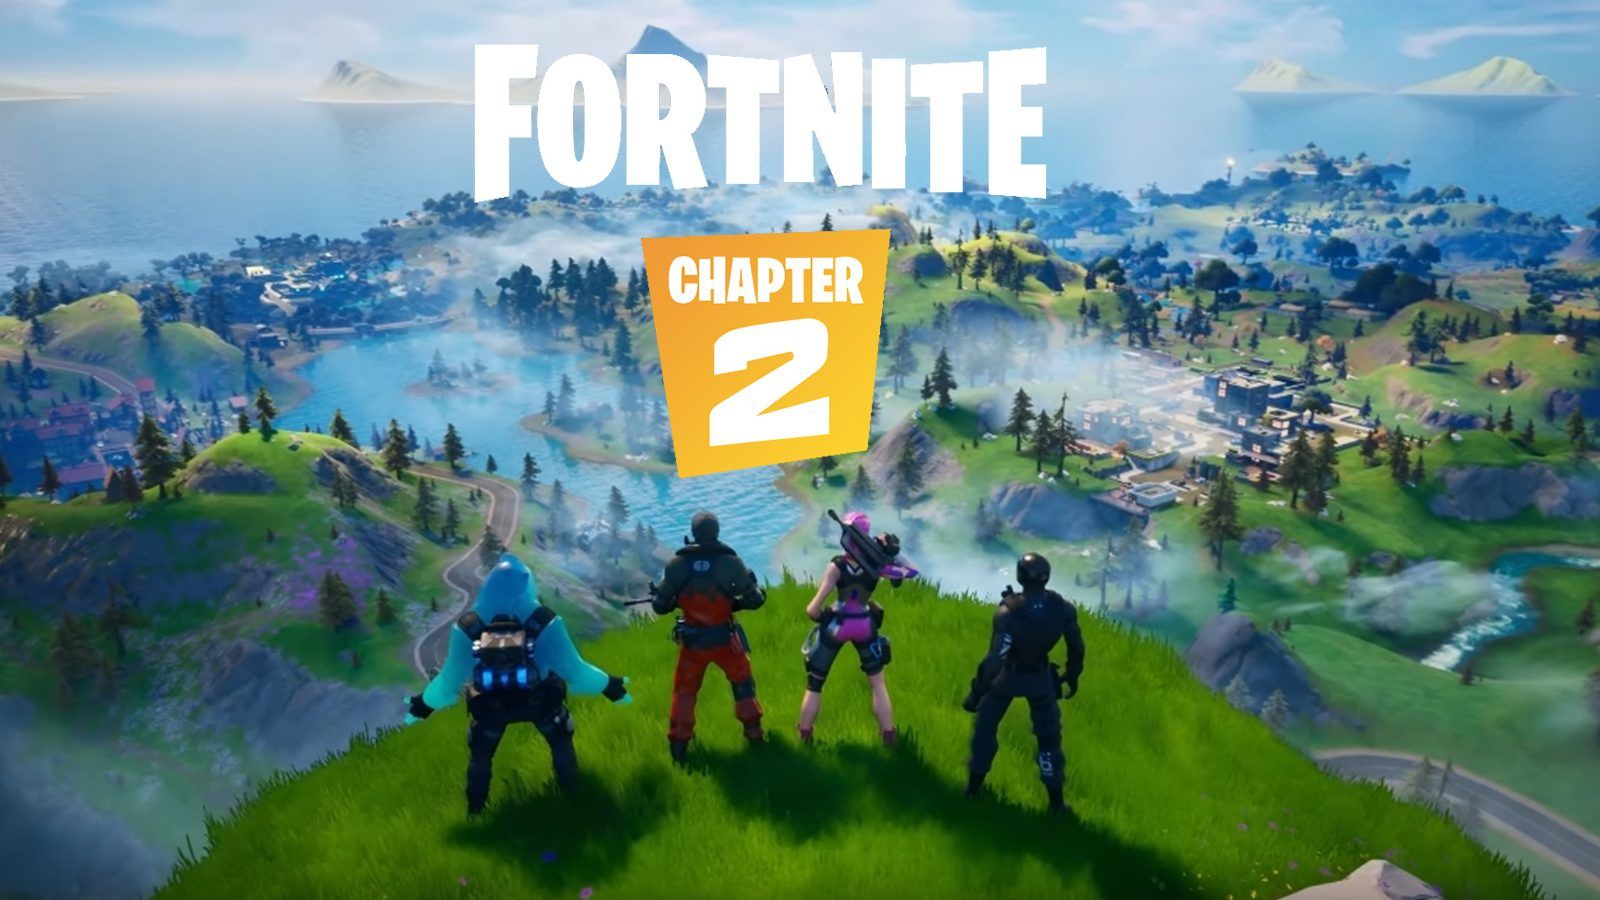 Fortnite Chapter 2 Brings In A New Map, Gameplay Features, & A New